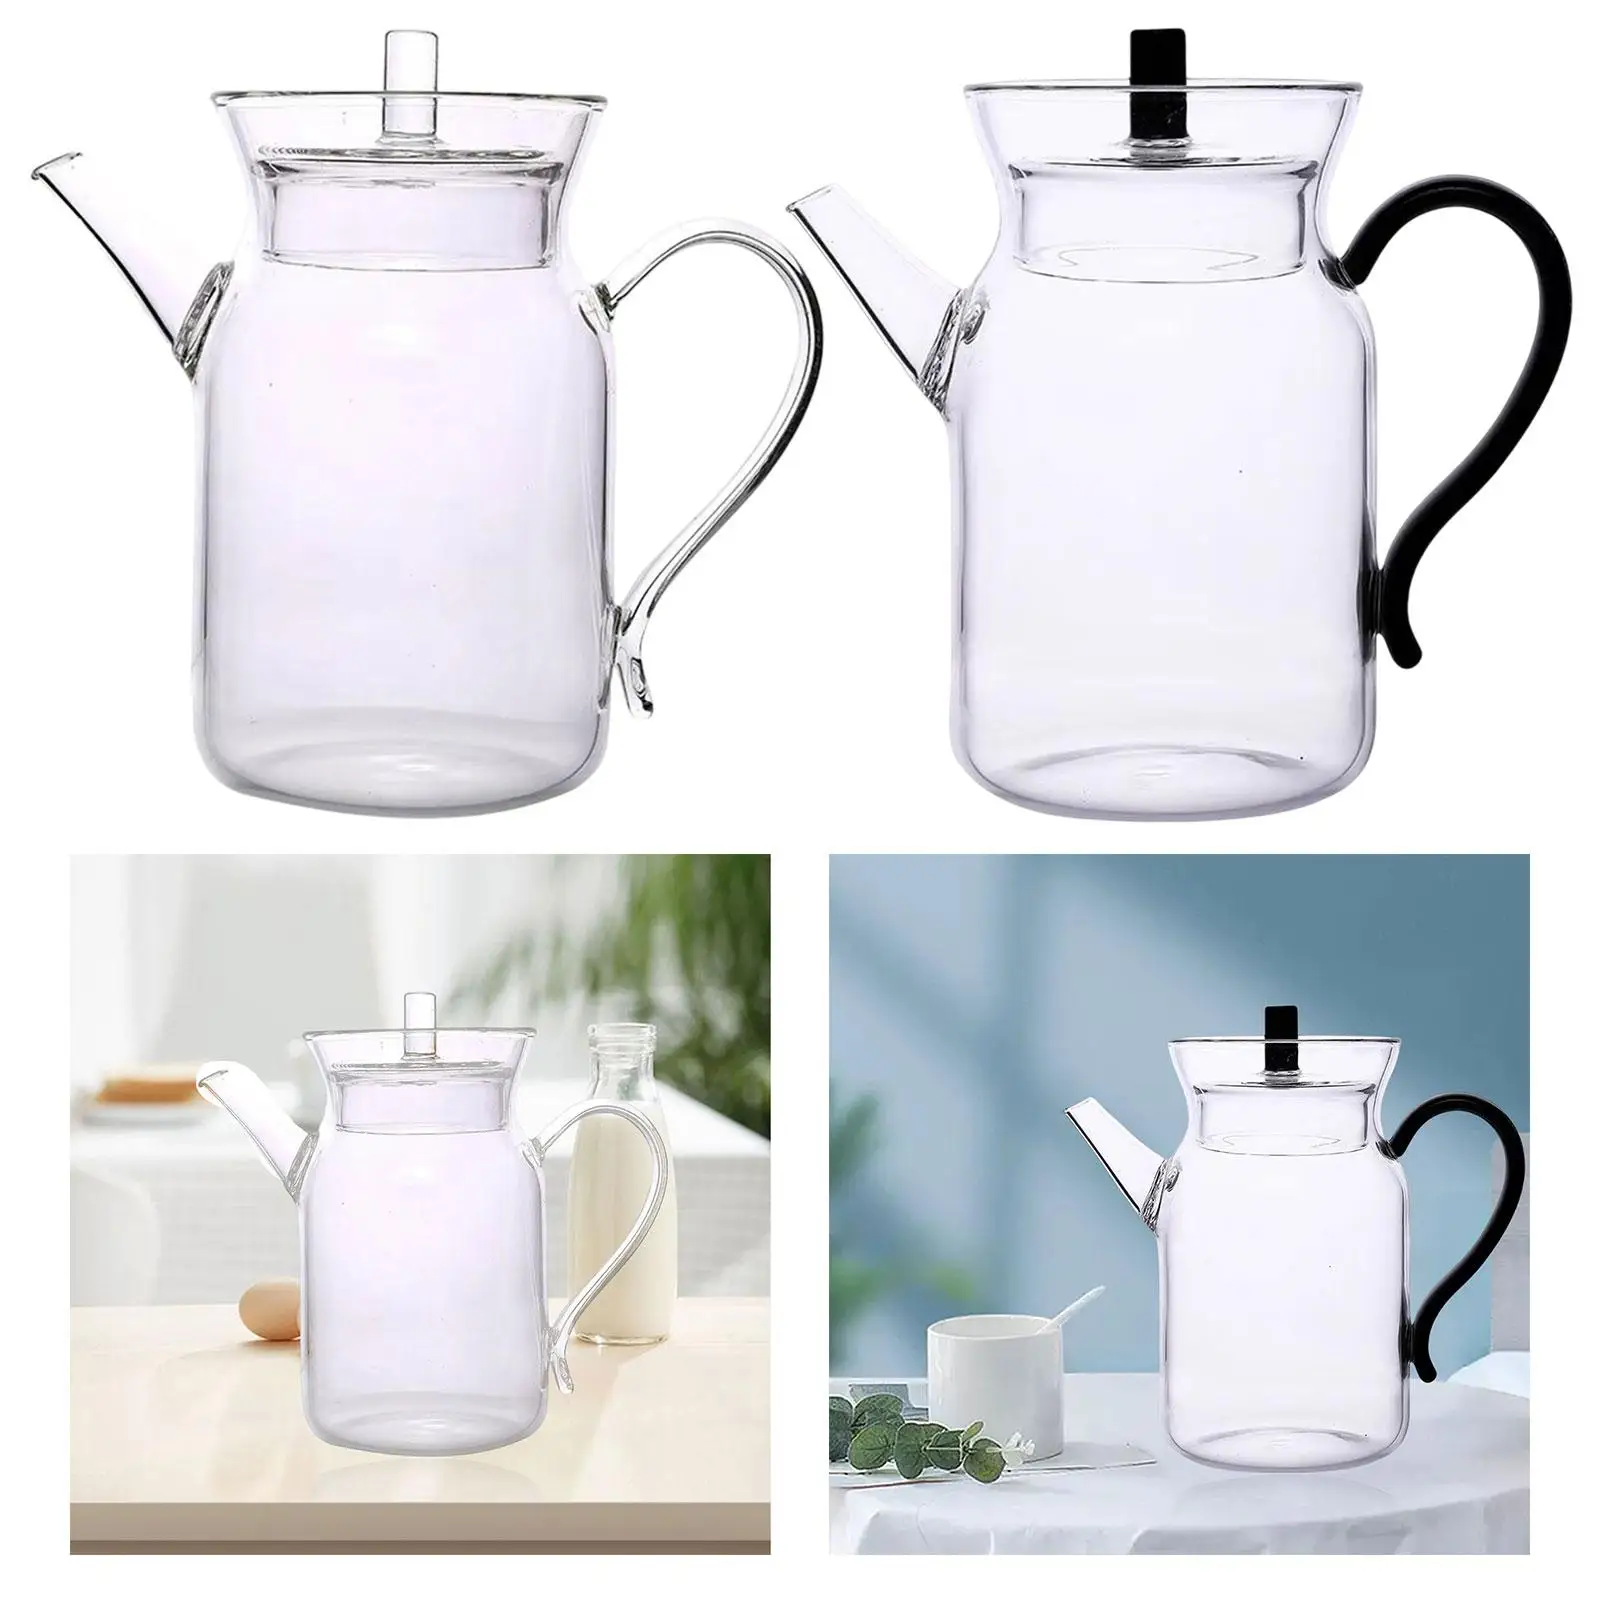 Portable Glass Water Pitcher 350ml Bottle Coffeeware Iced Tea Maker Juice Brewer Milk for Home Use Cafe Camping Bar Restaurant